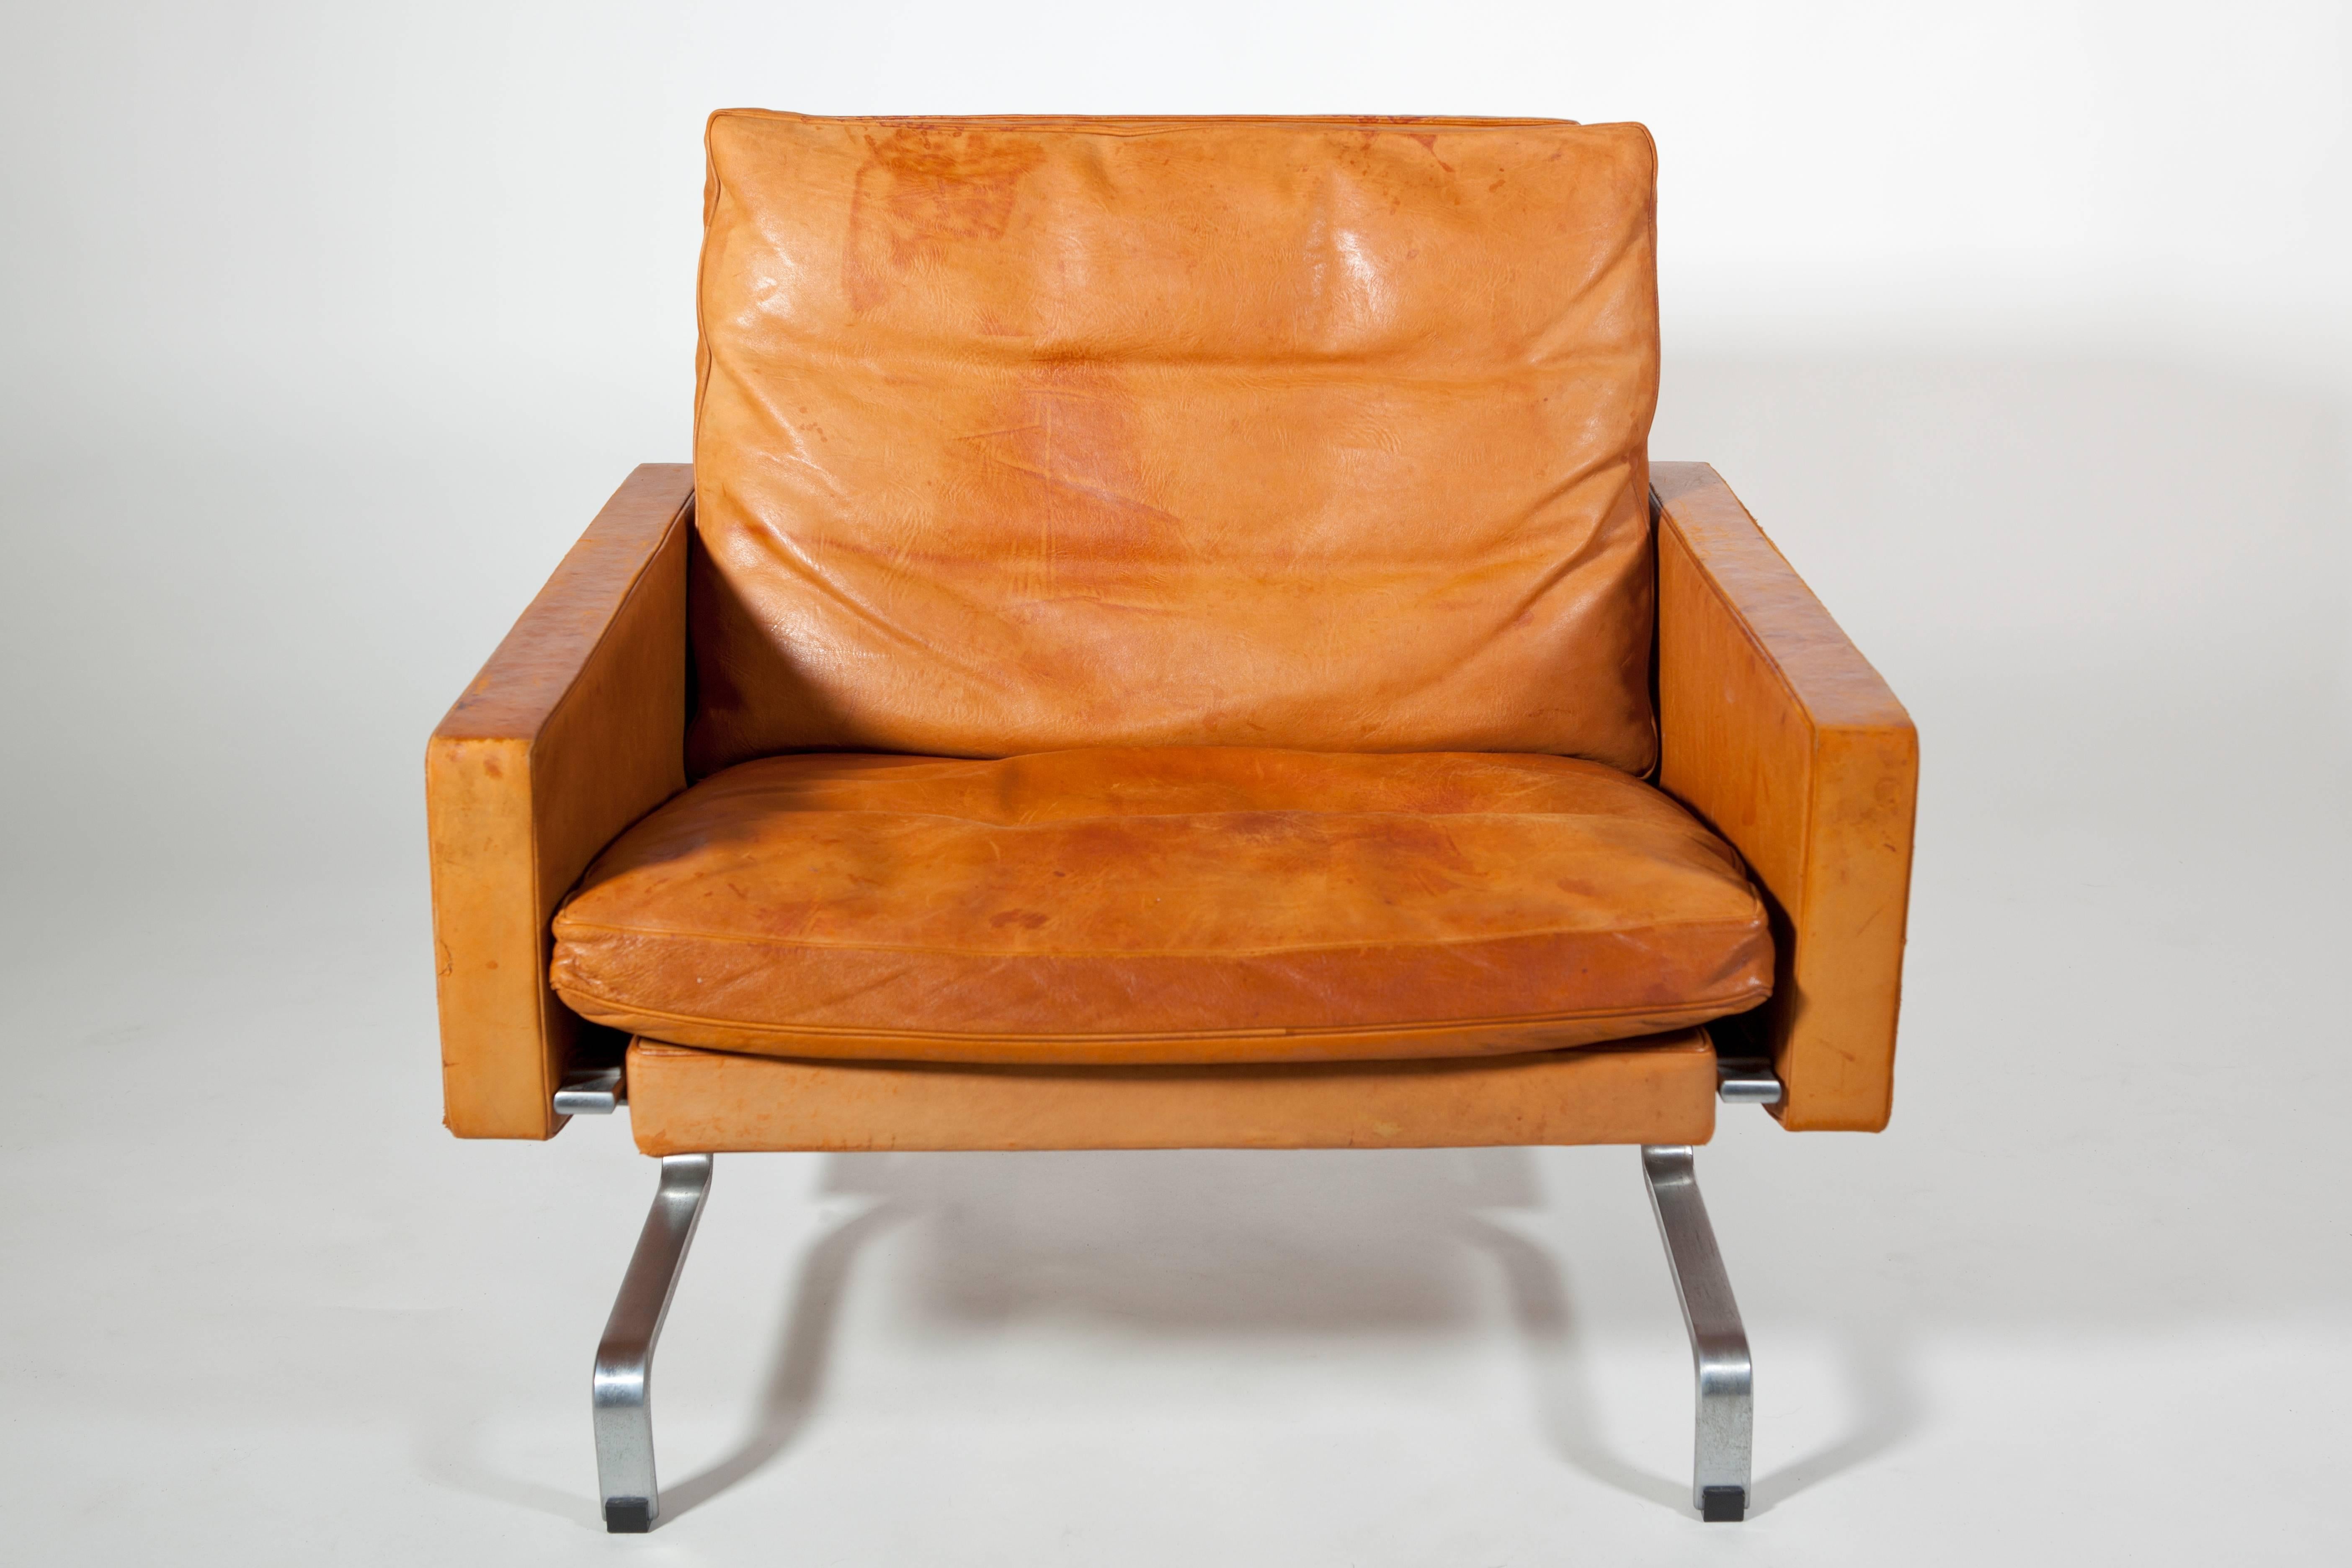 This vintage steel and leather chair, model PK31/1, is an early Industrial Design of Danish designer Poul Kjaerholm. This chair was part of the rare first series produced by E. Kold Christensen, shortly after 1958. The chair has been used as it was